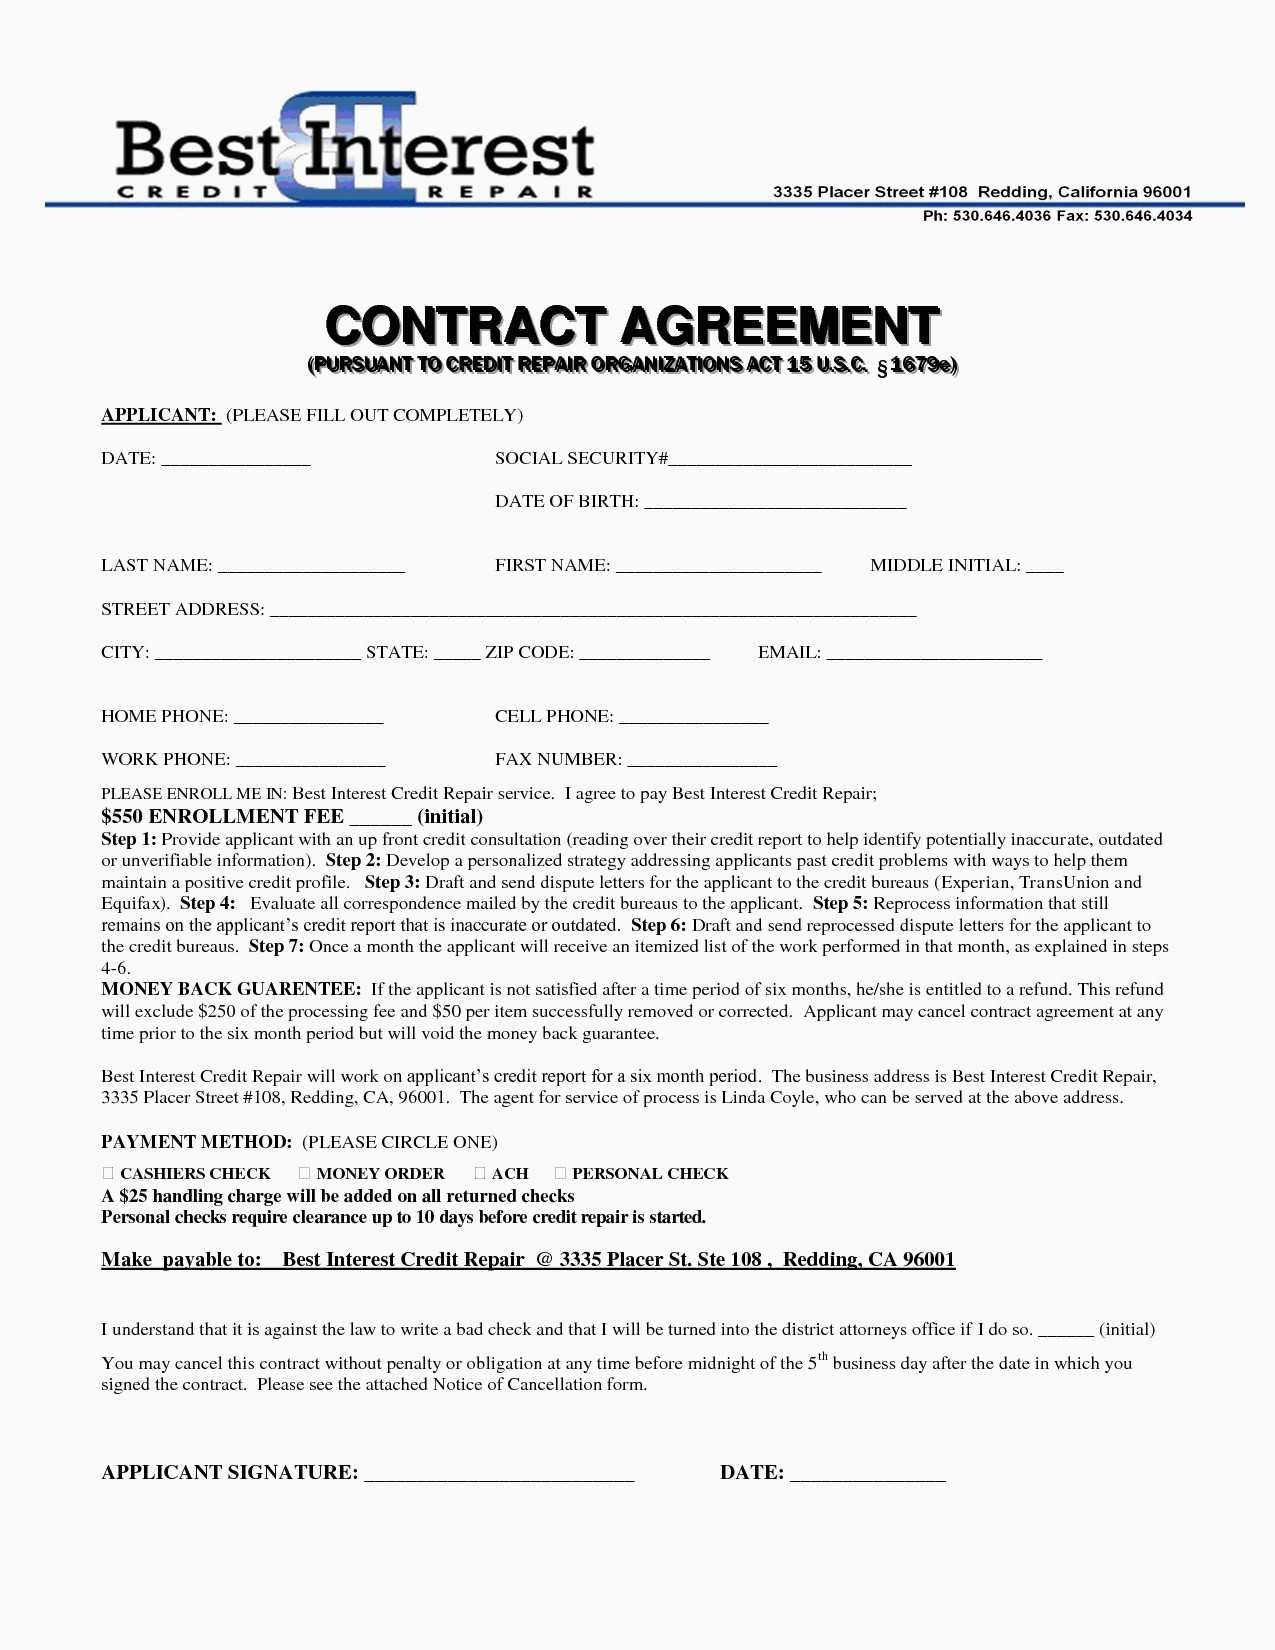 Mortgage Loan Agreement Sample Luxury Soul Selling Contract Template